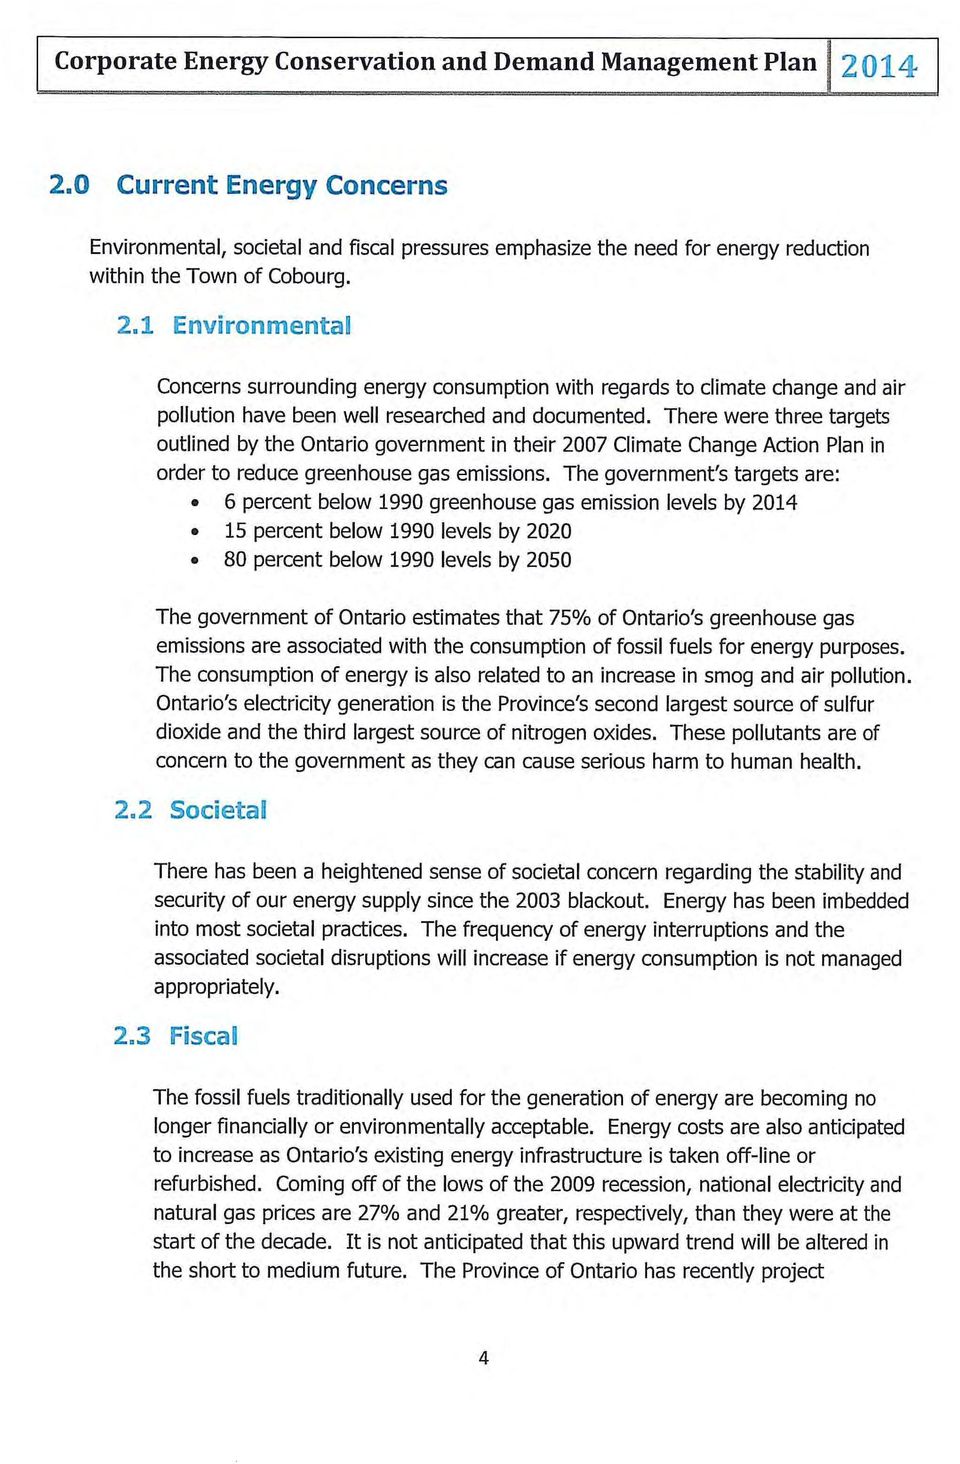 1 Environmental Concerns surrounding energy consumption with regards to climate change and air pollution have been well researched and documented.